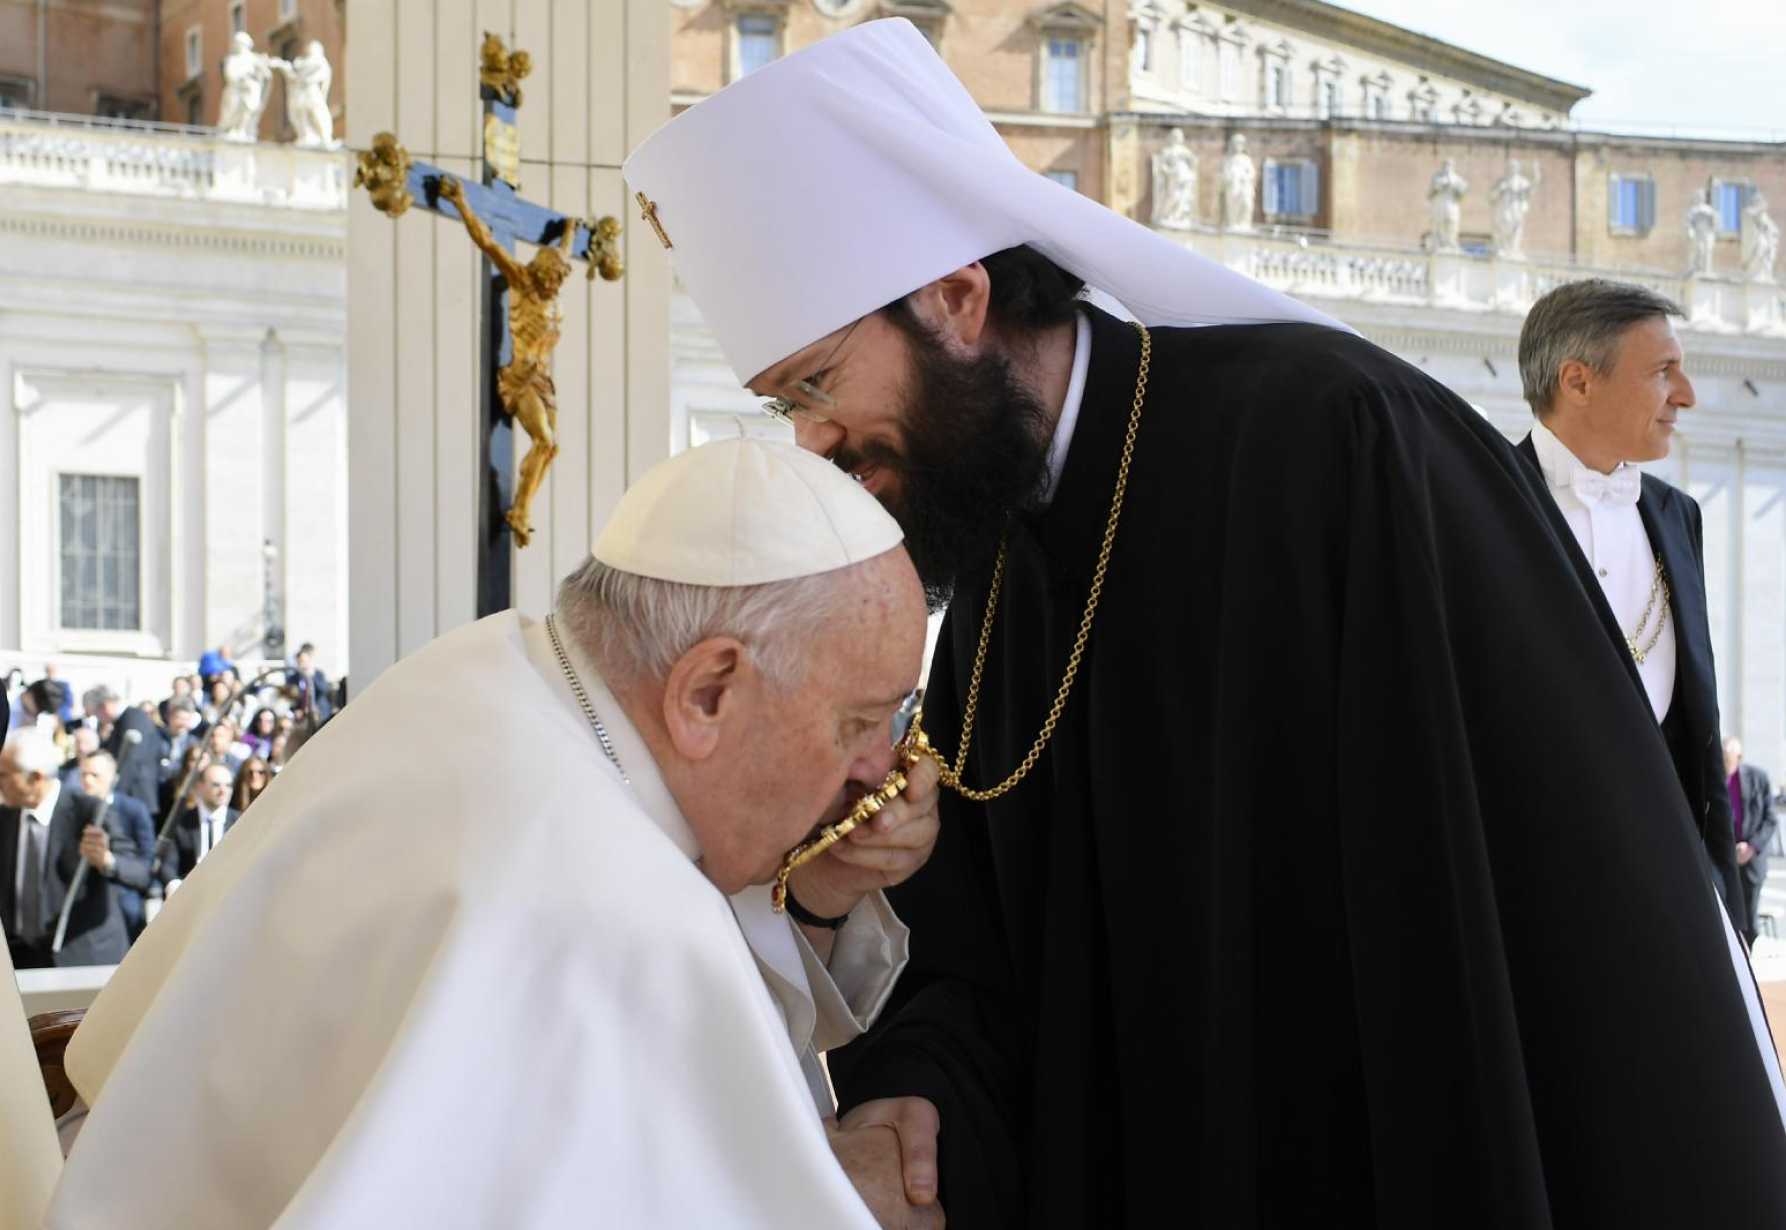 After praying for peace in Ukraine, pope greets Russian Orthodox official